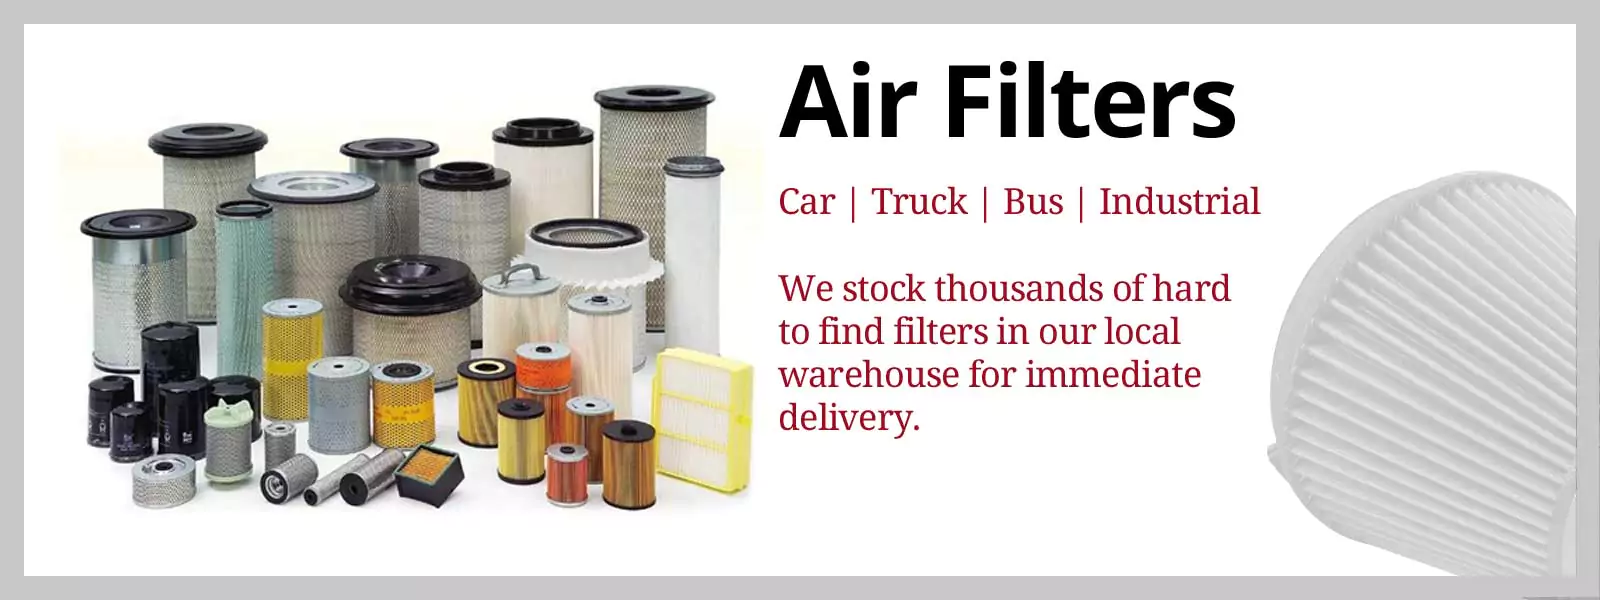 Auto Air Filters truck Air Filters industrial Air Filters